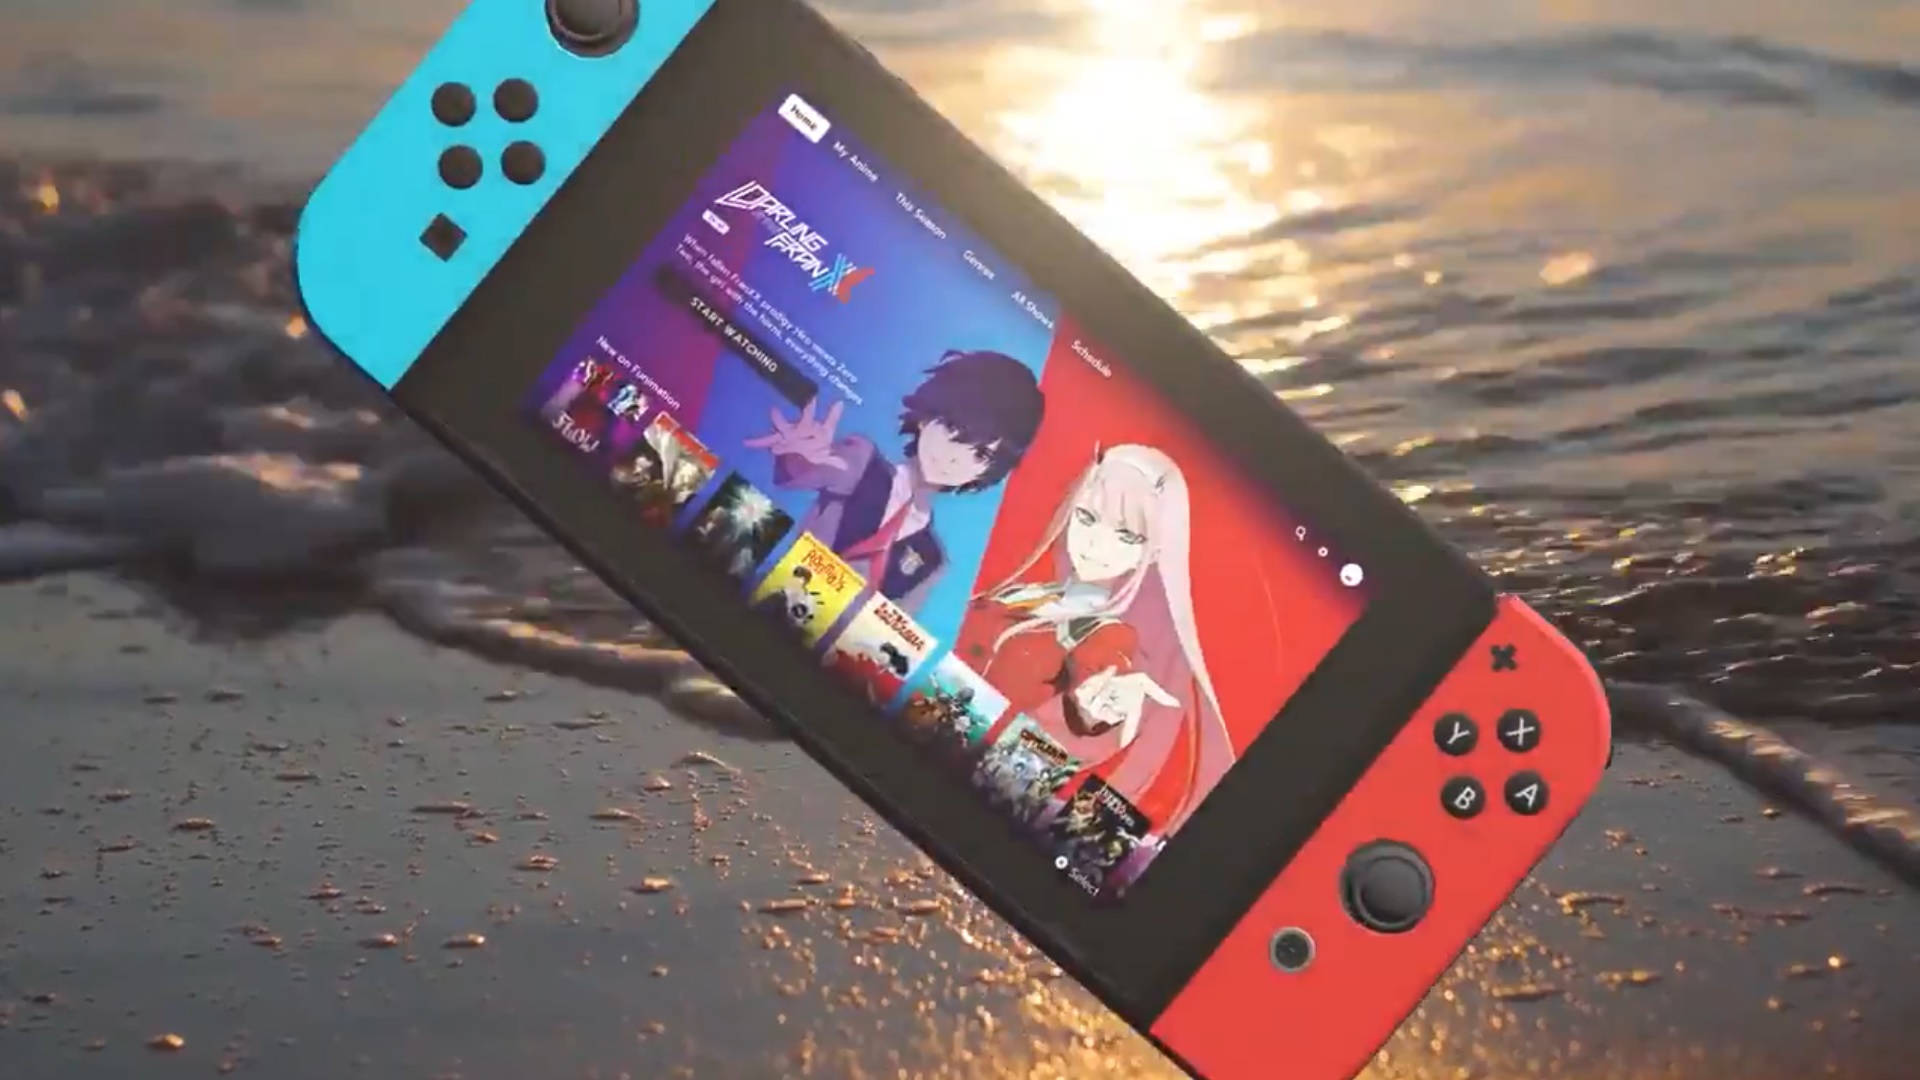 funimation switch